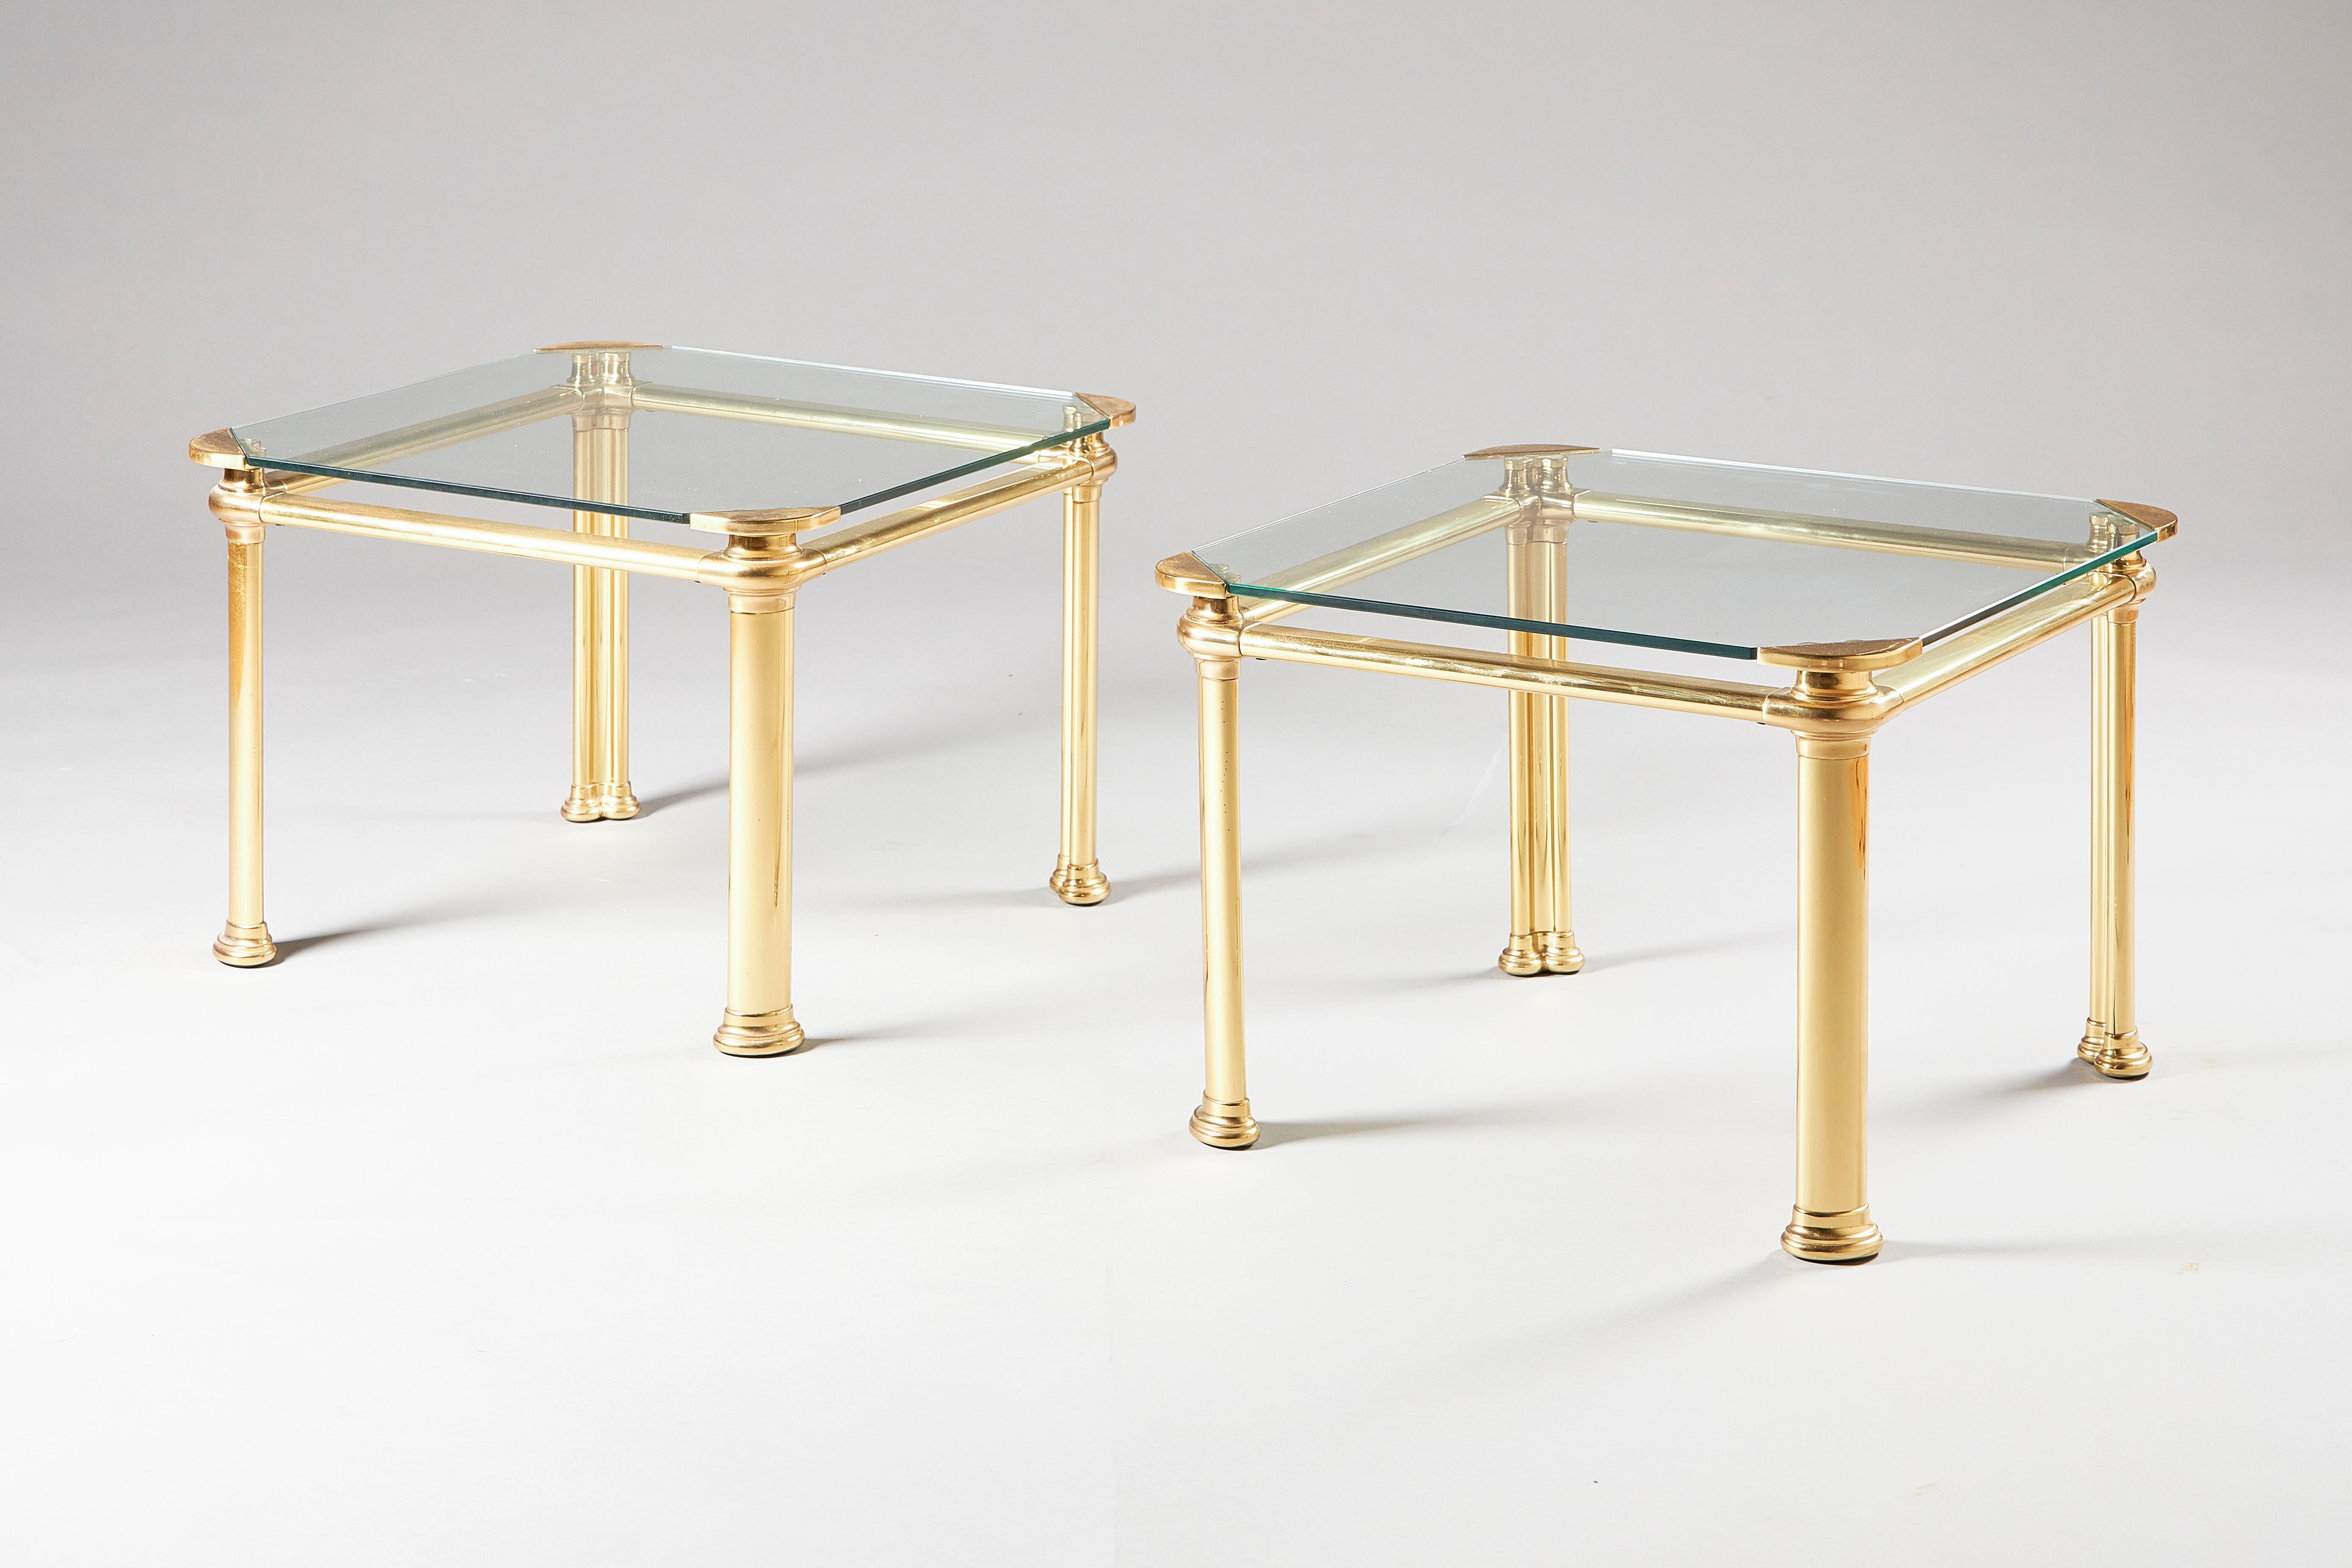 A pair of lacquered brass side tables, likely Italian, 1960s, of square form, on column shaped legs, with removable glass inset tops.